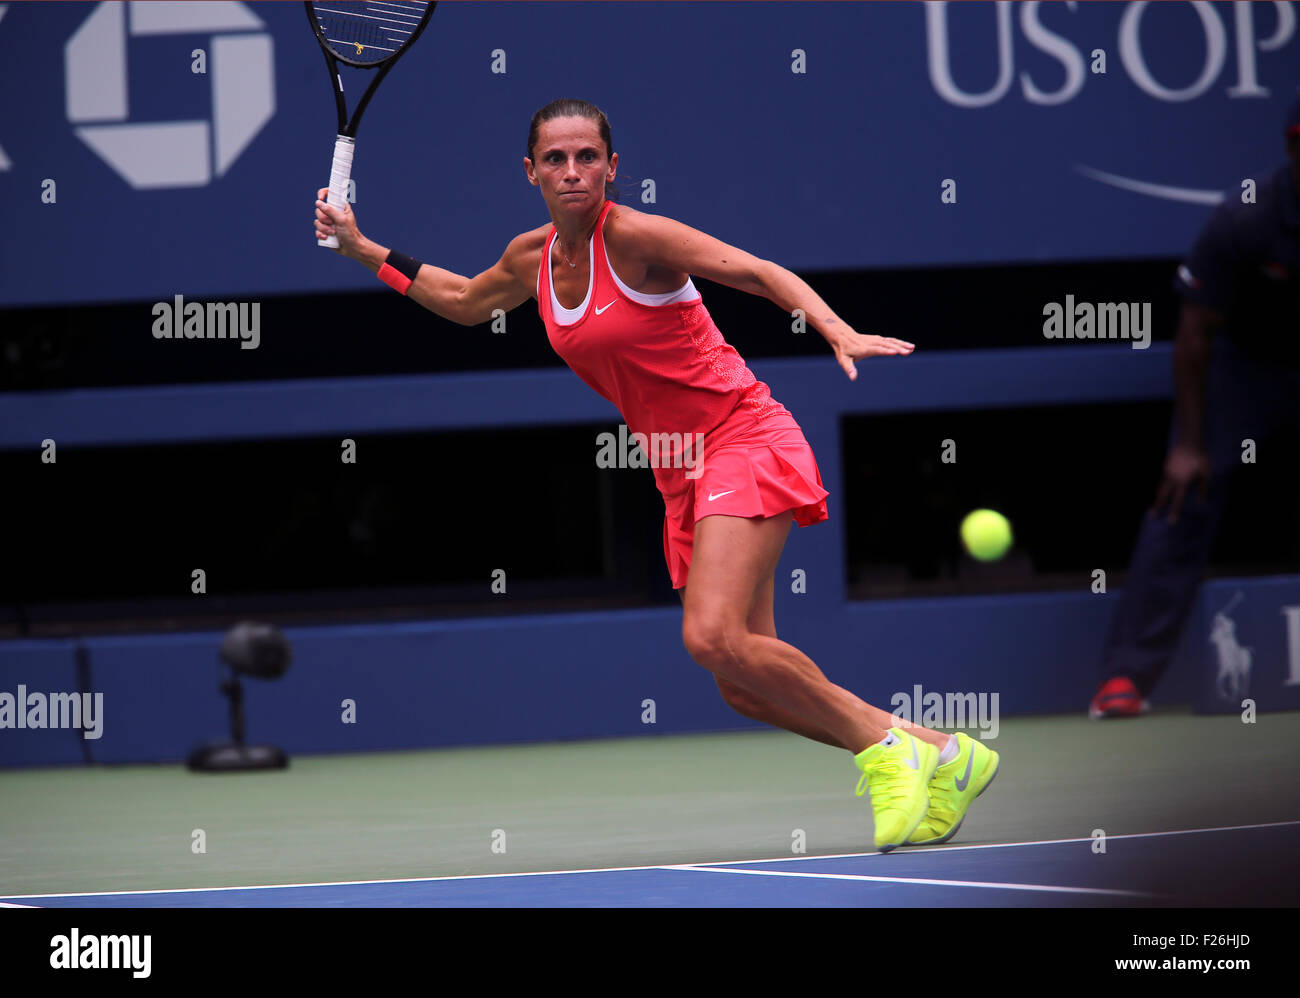 New York, USA. 12th Sep, 2015. Roberta Vinci of Italy sets up a forehand to countrywoman Flavia Penetta during the women's final of the U.S. Open at Flushing Meadows, New York on the afternoon of September 12th, 2015.  Pennetta won the match 7-6 (7-4), 6-2 Credit:  Adam Stoltman/Alamy Live News Stock Photo